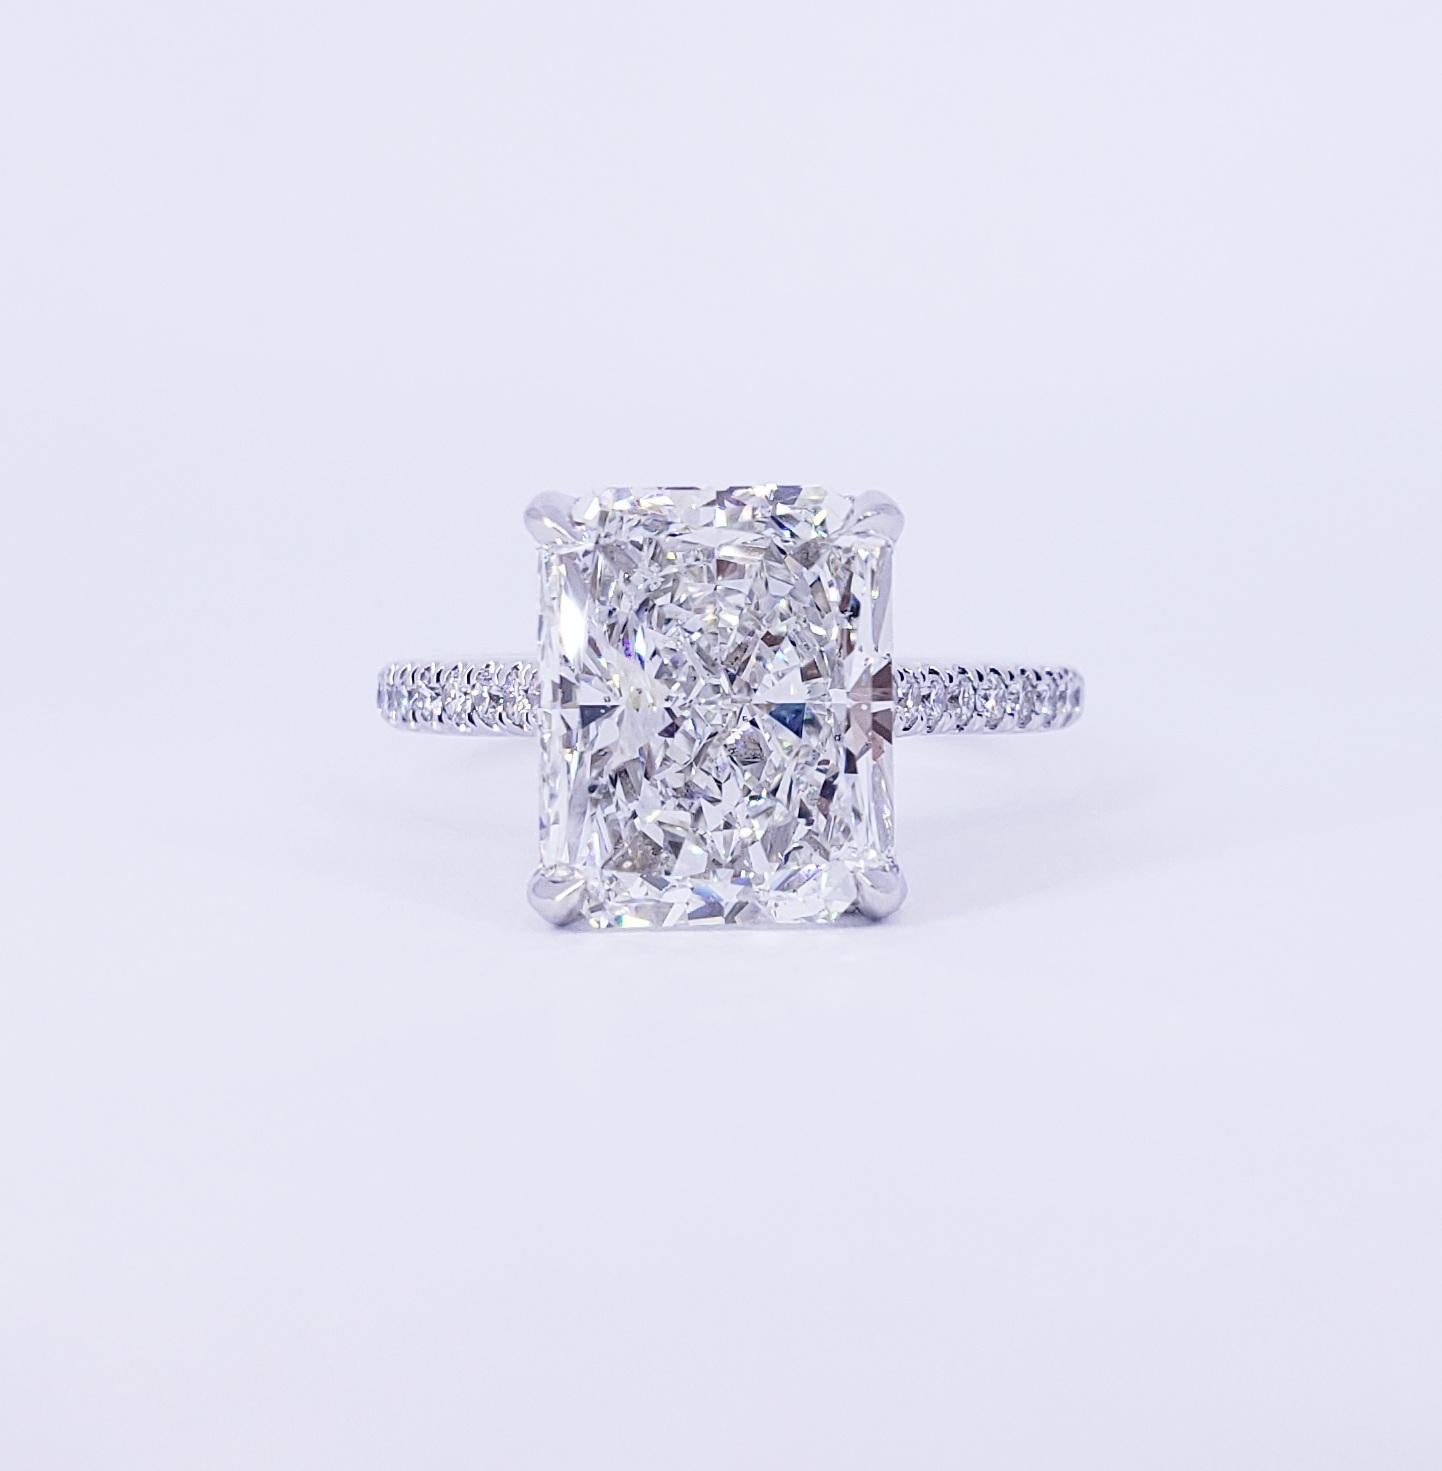 Rosenberg Diamonds & Co. 5.02 carat Radiant cut H color SI1 clarity is accompanied by a GIA certificate. This spectacular elongated Radiant is full of brilliance and it is set in a handmade 18k white gold setting. This ring continues its elegance